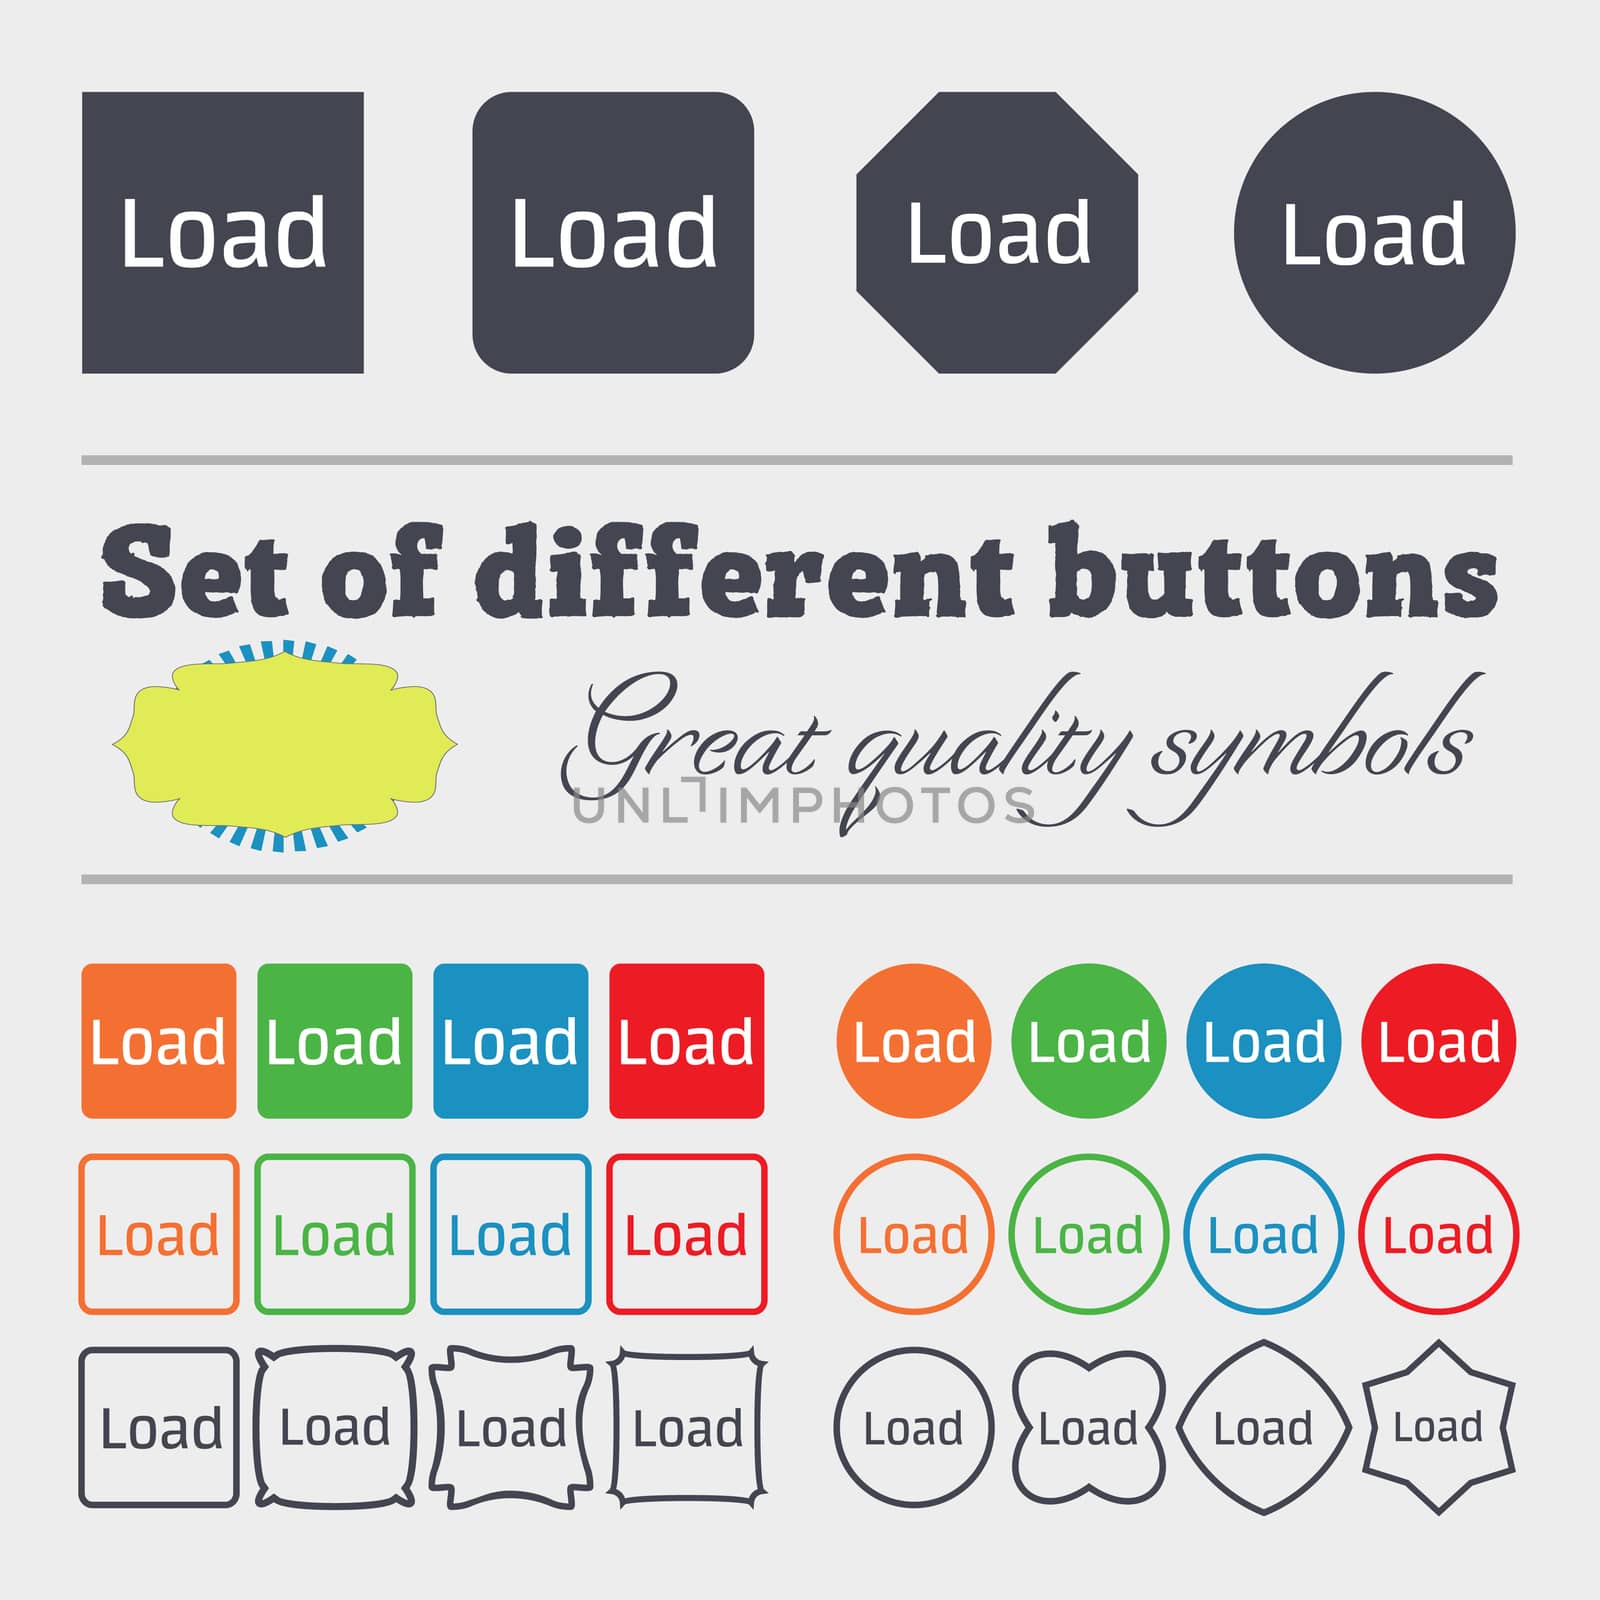 Download now icon. Load symbol. Big set of colorful, diverse, high-quality buttons. illustration